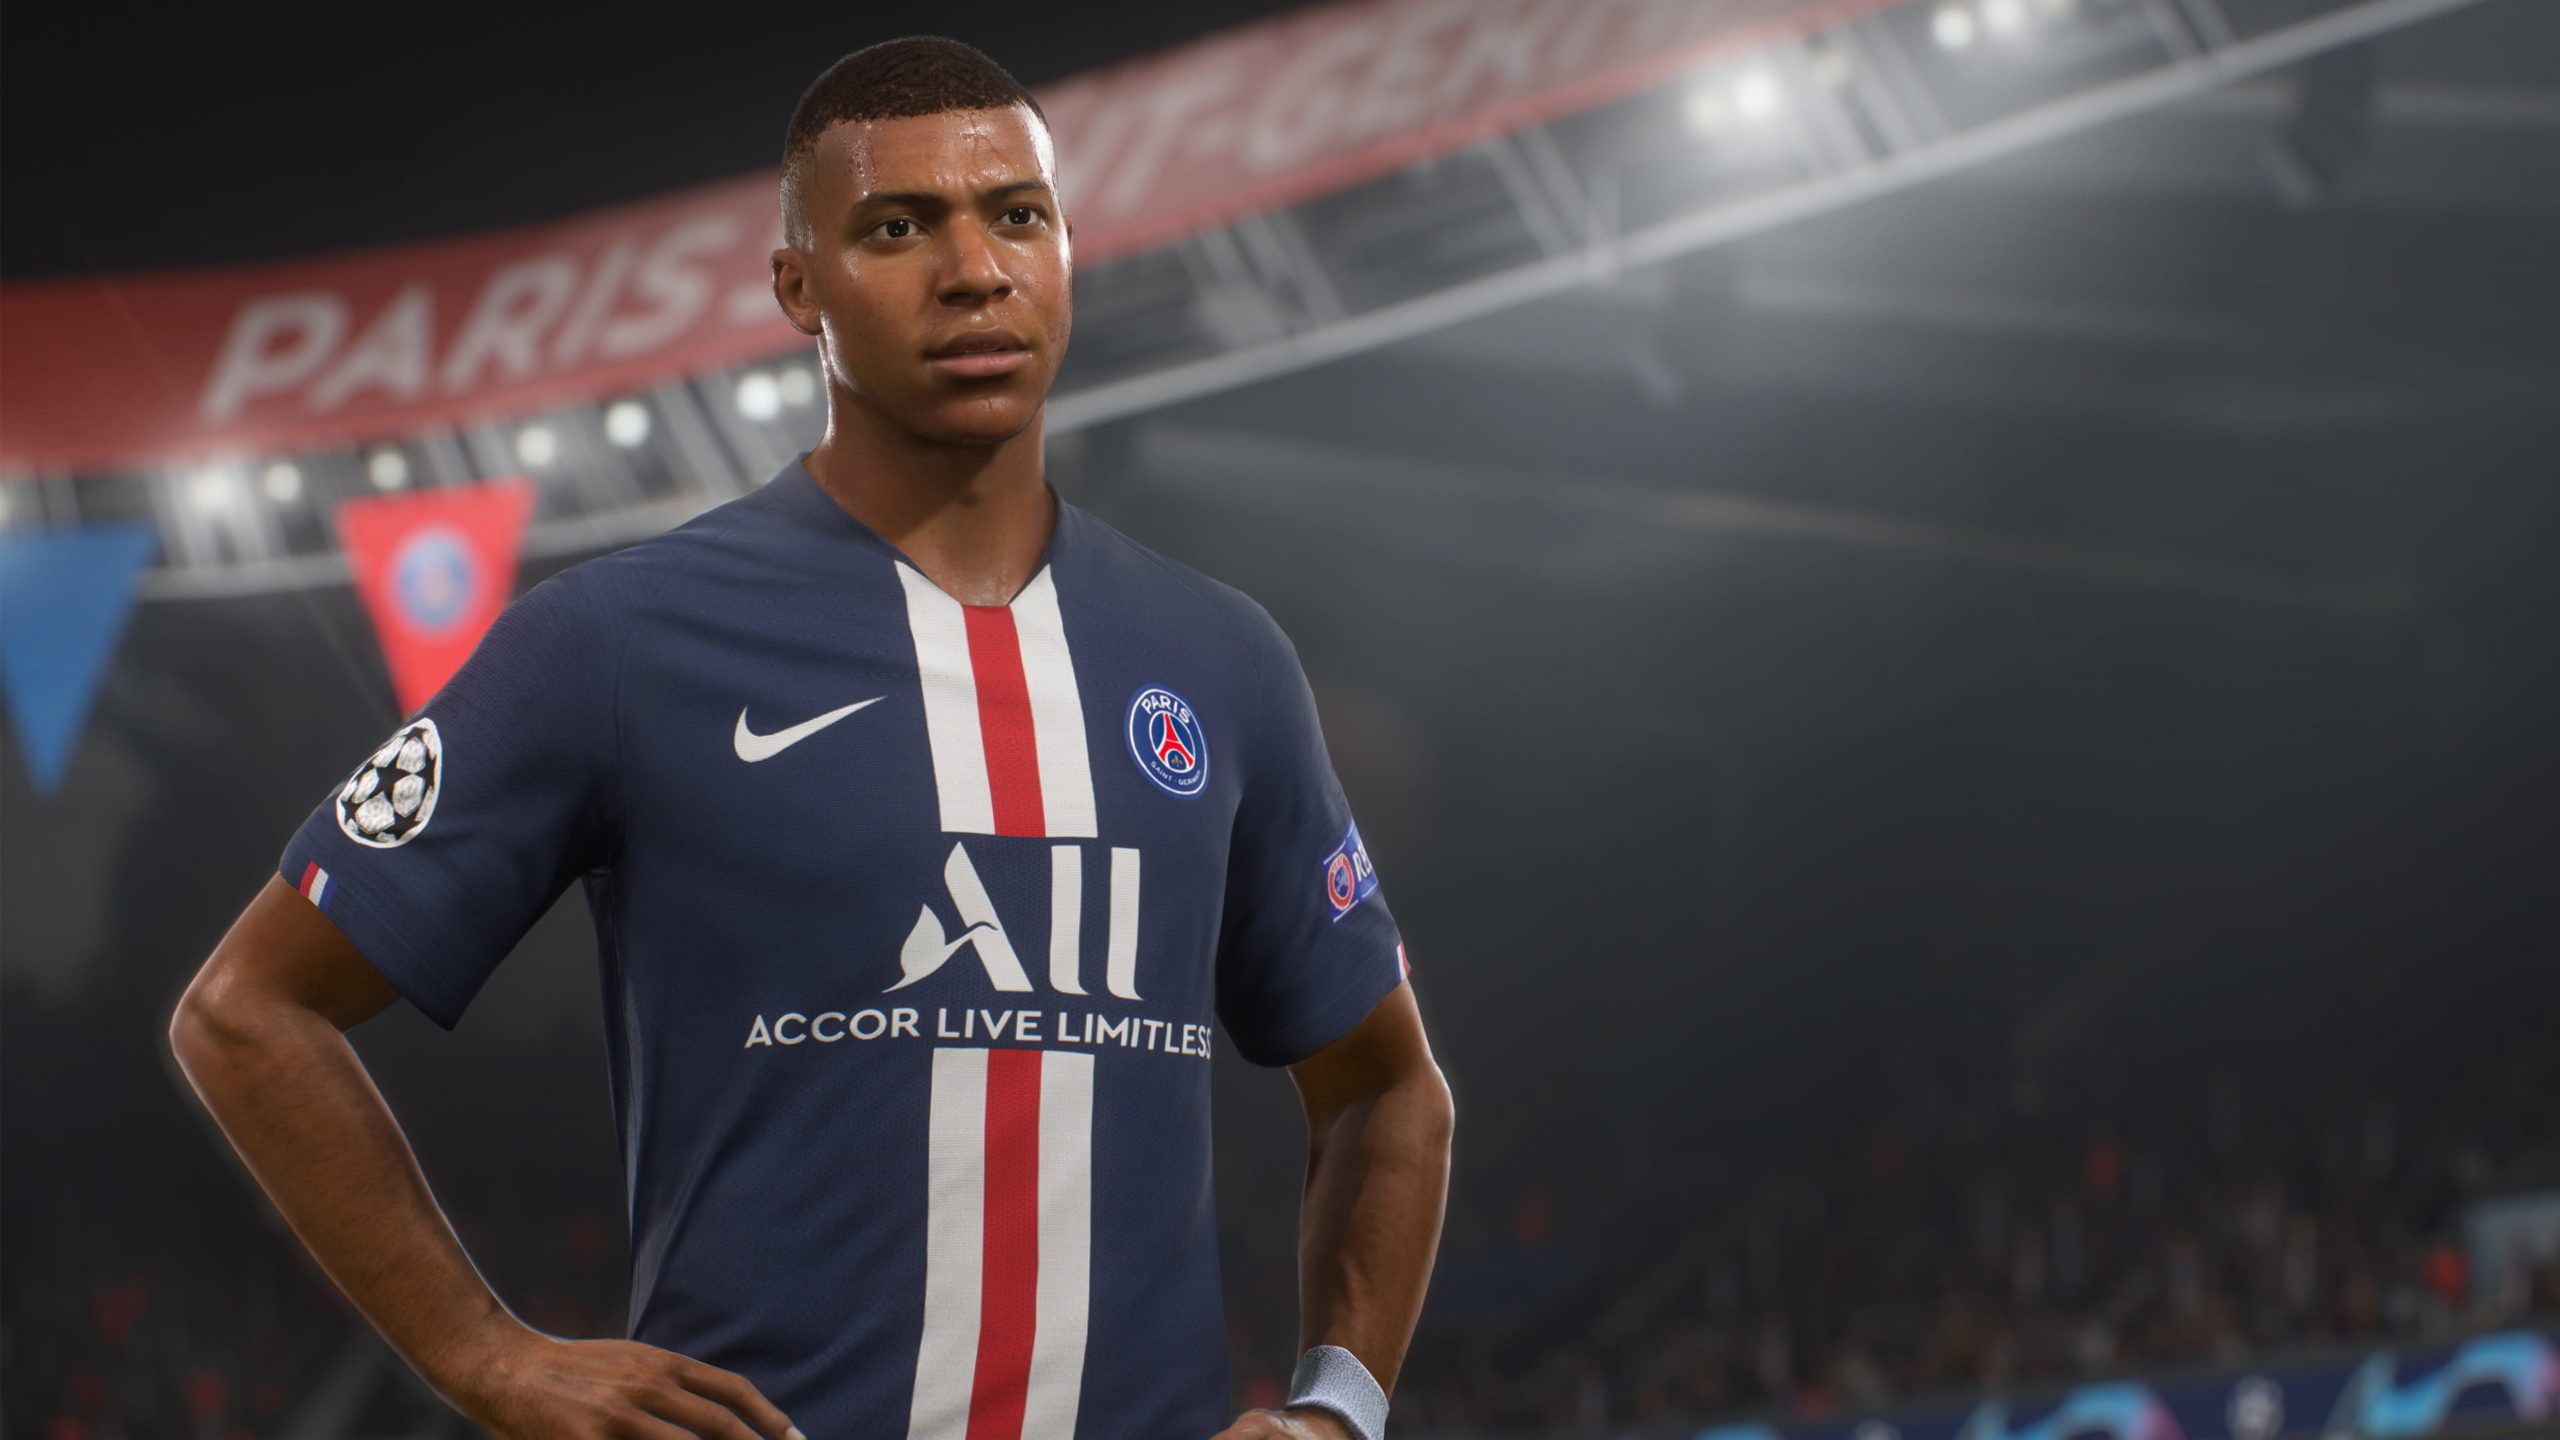 FIFA 21 PC Port: Will We Only Get The PS4 XB1 Version This Year?